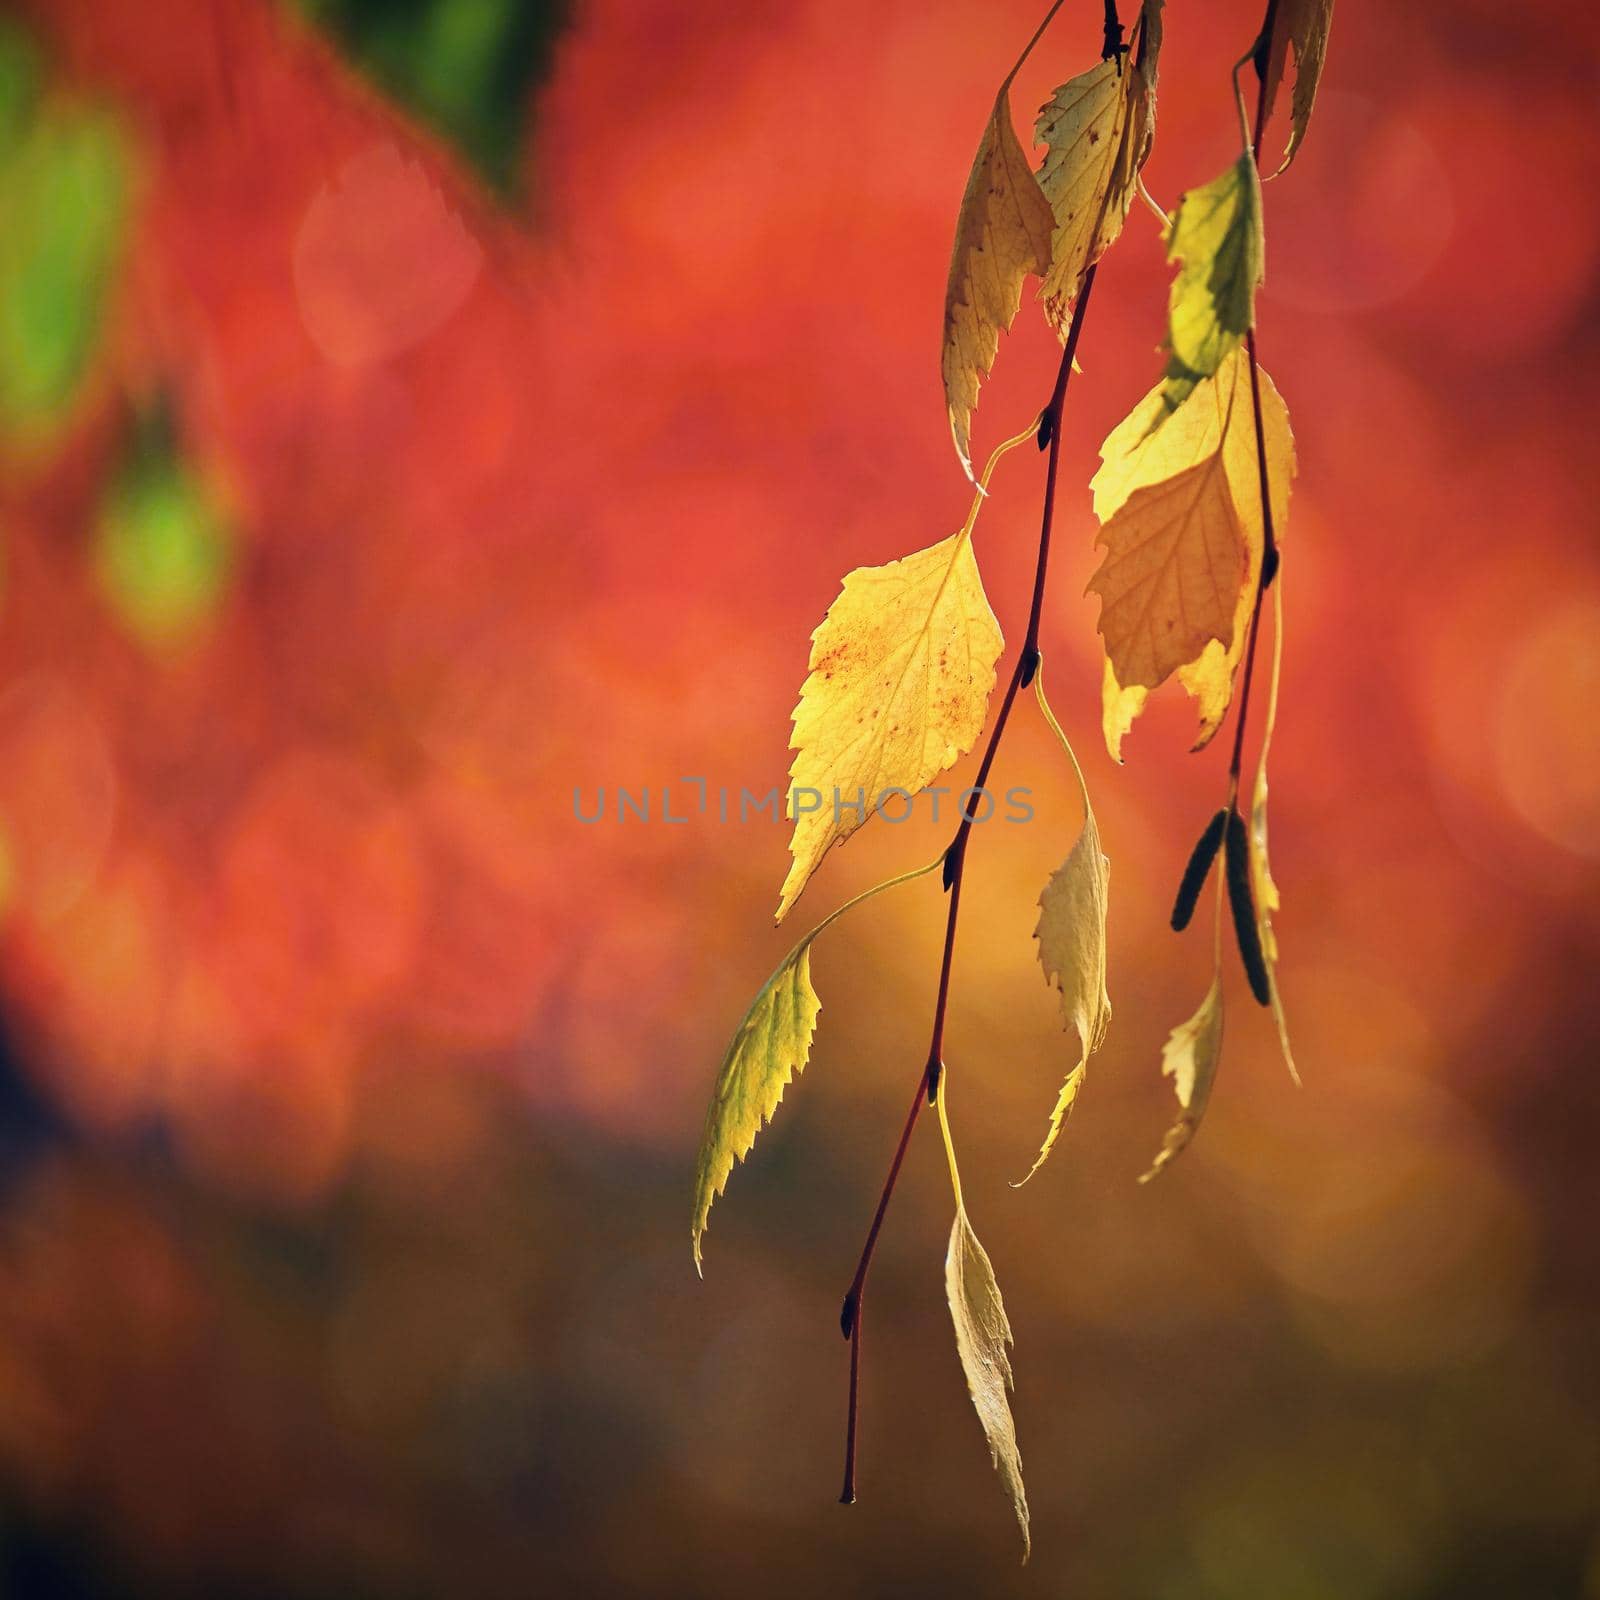 Seasonal nature concept. Autumn colorful leaves on trees. Beautiful natural colorful background.